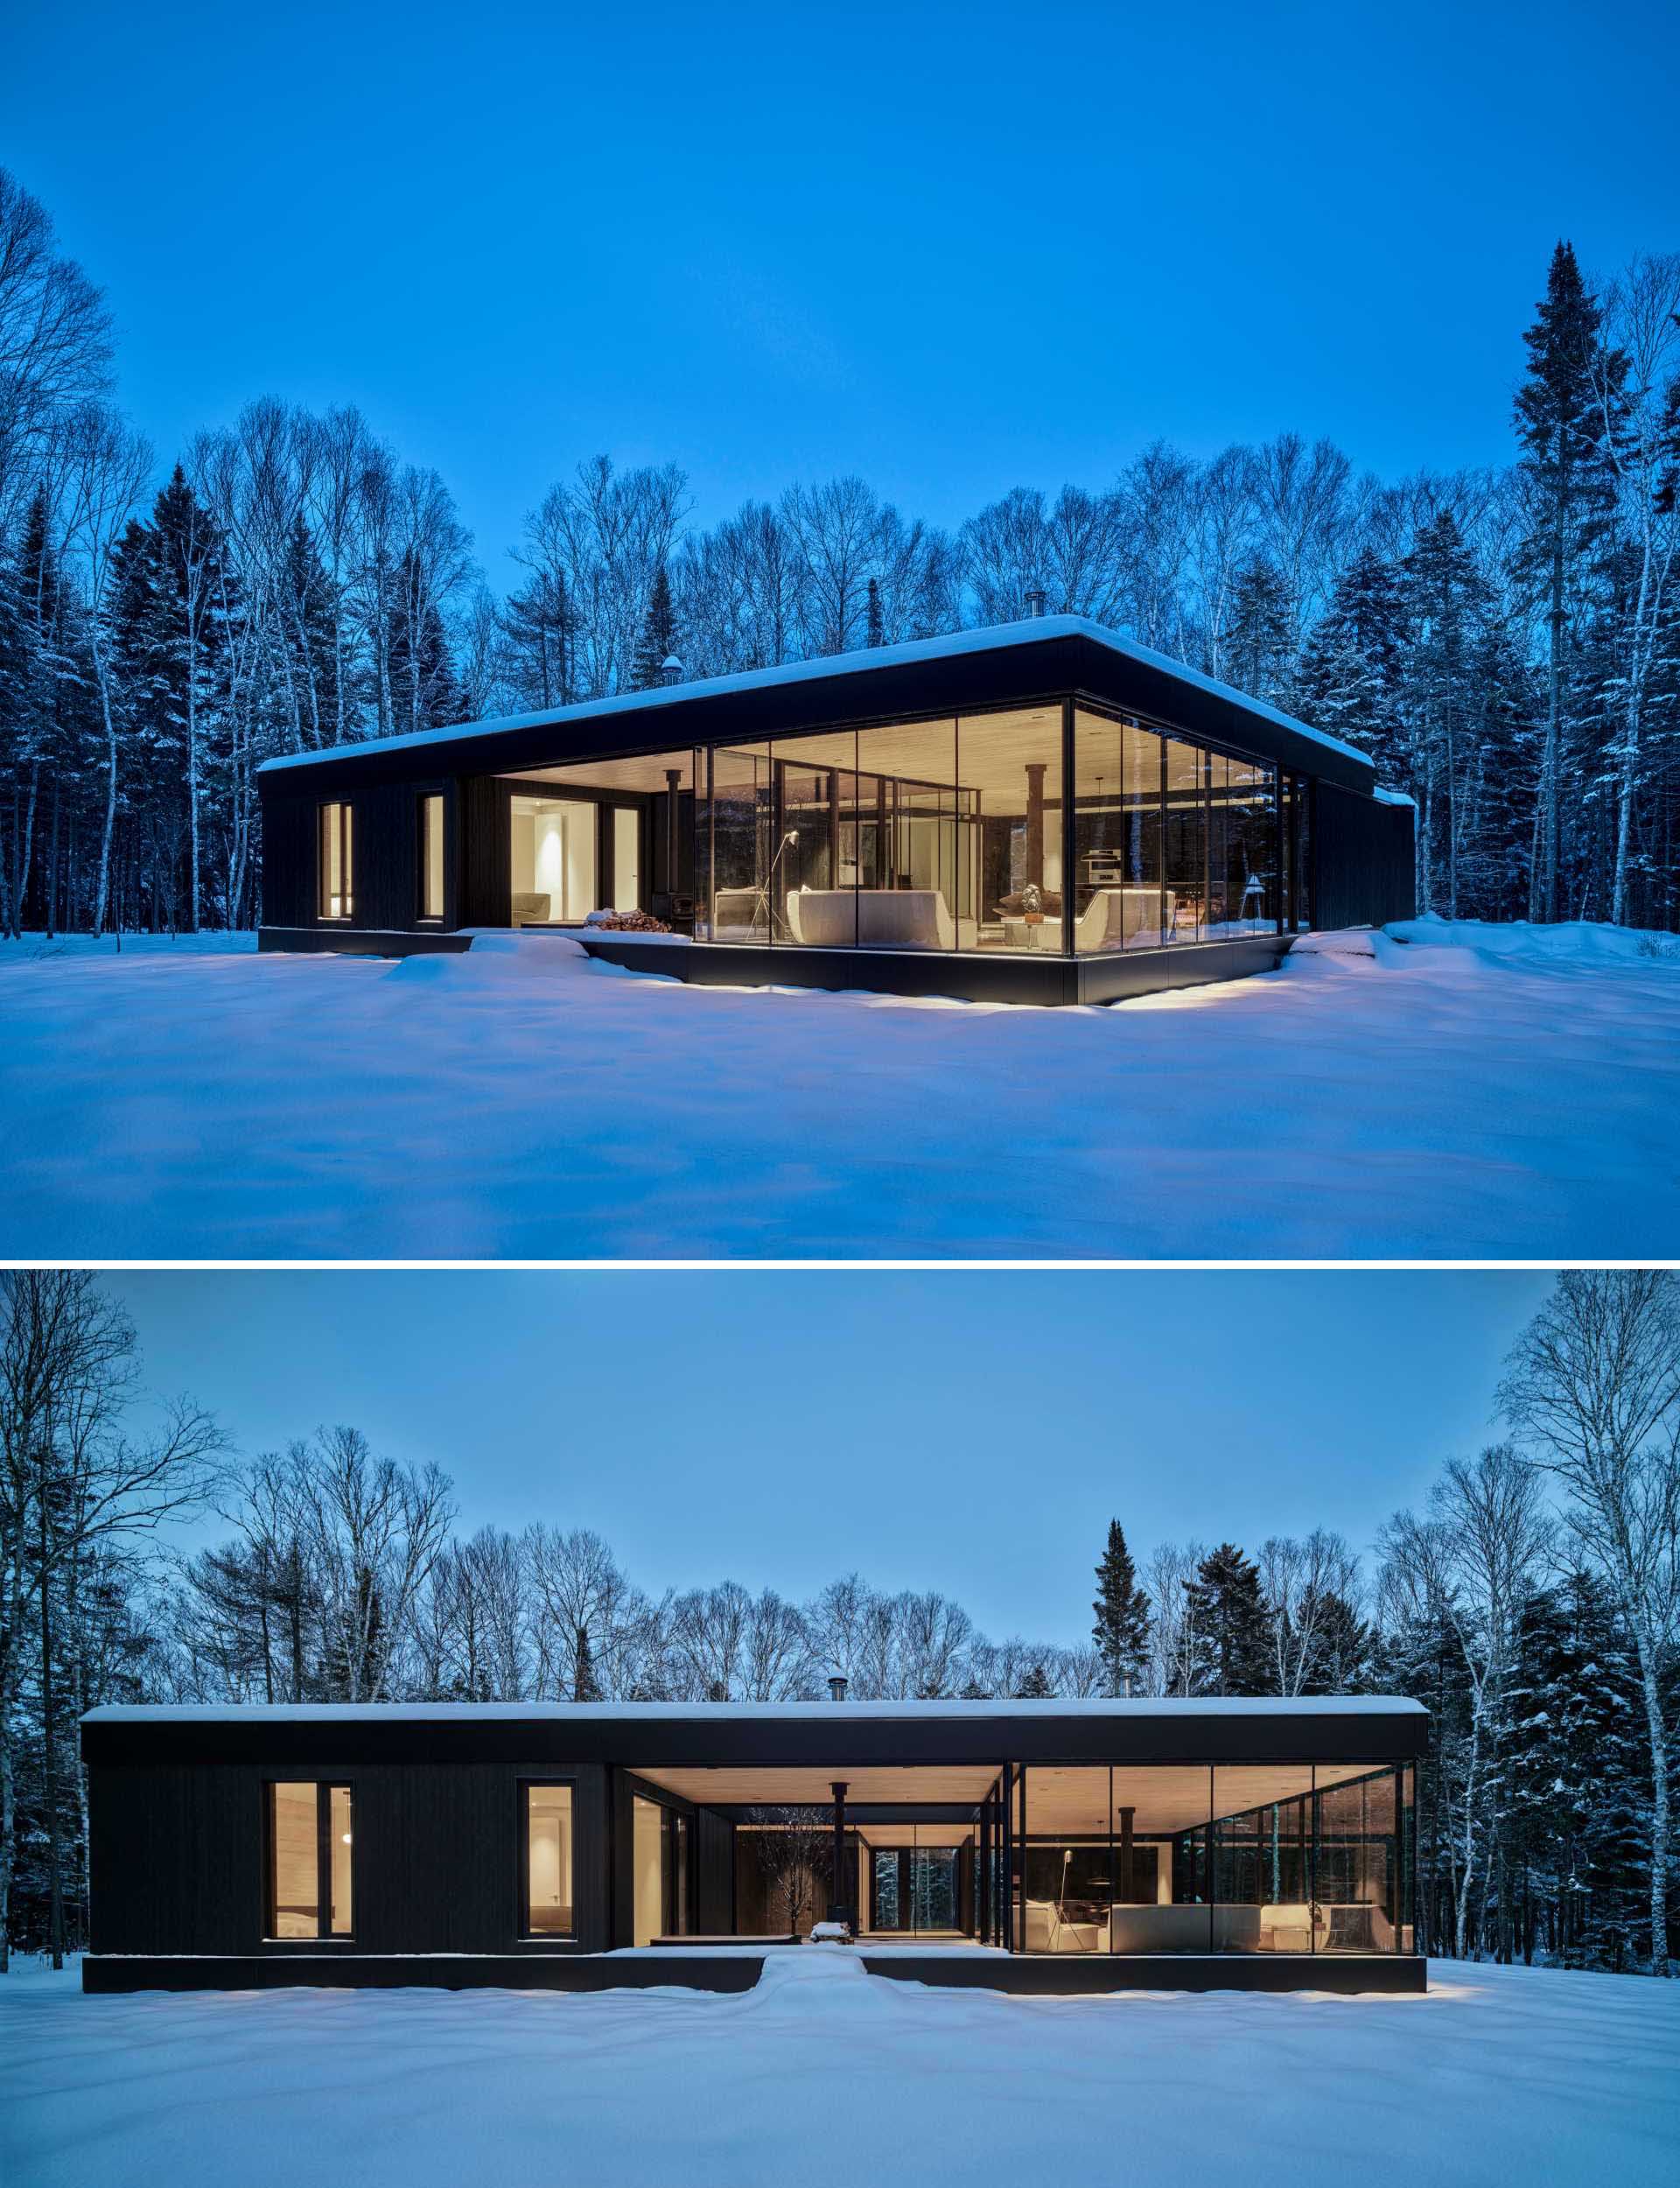 In winter, this modern home is lit like a lantern, adding warmth on an otherwise cold night.